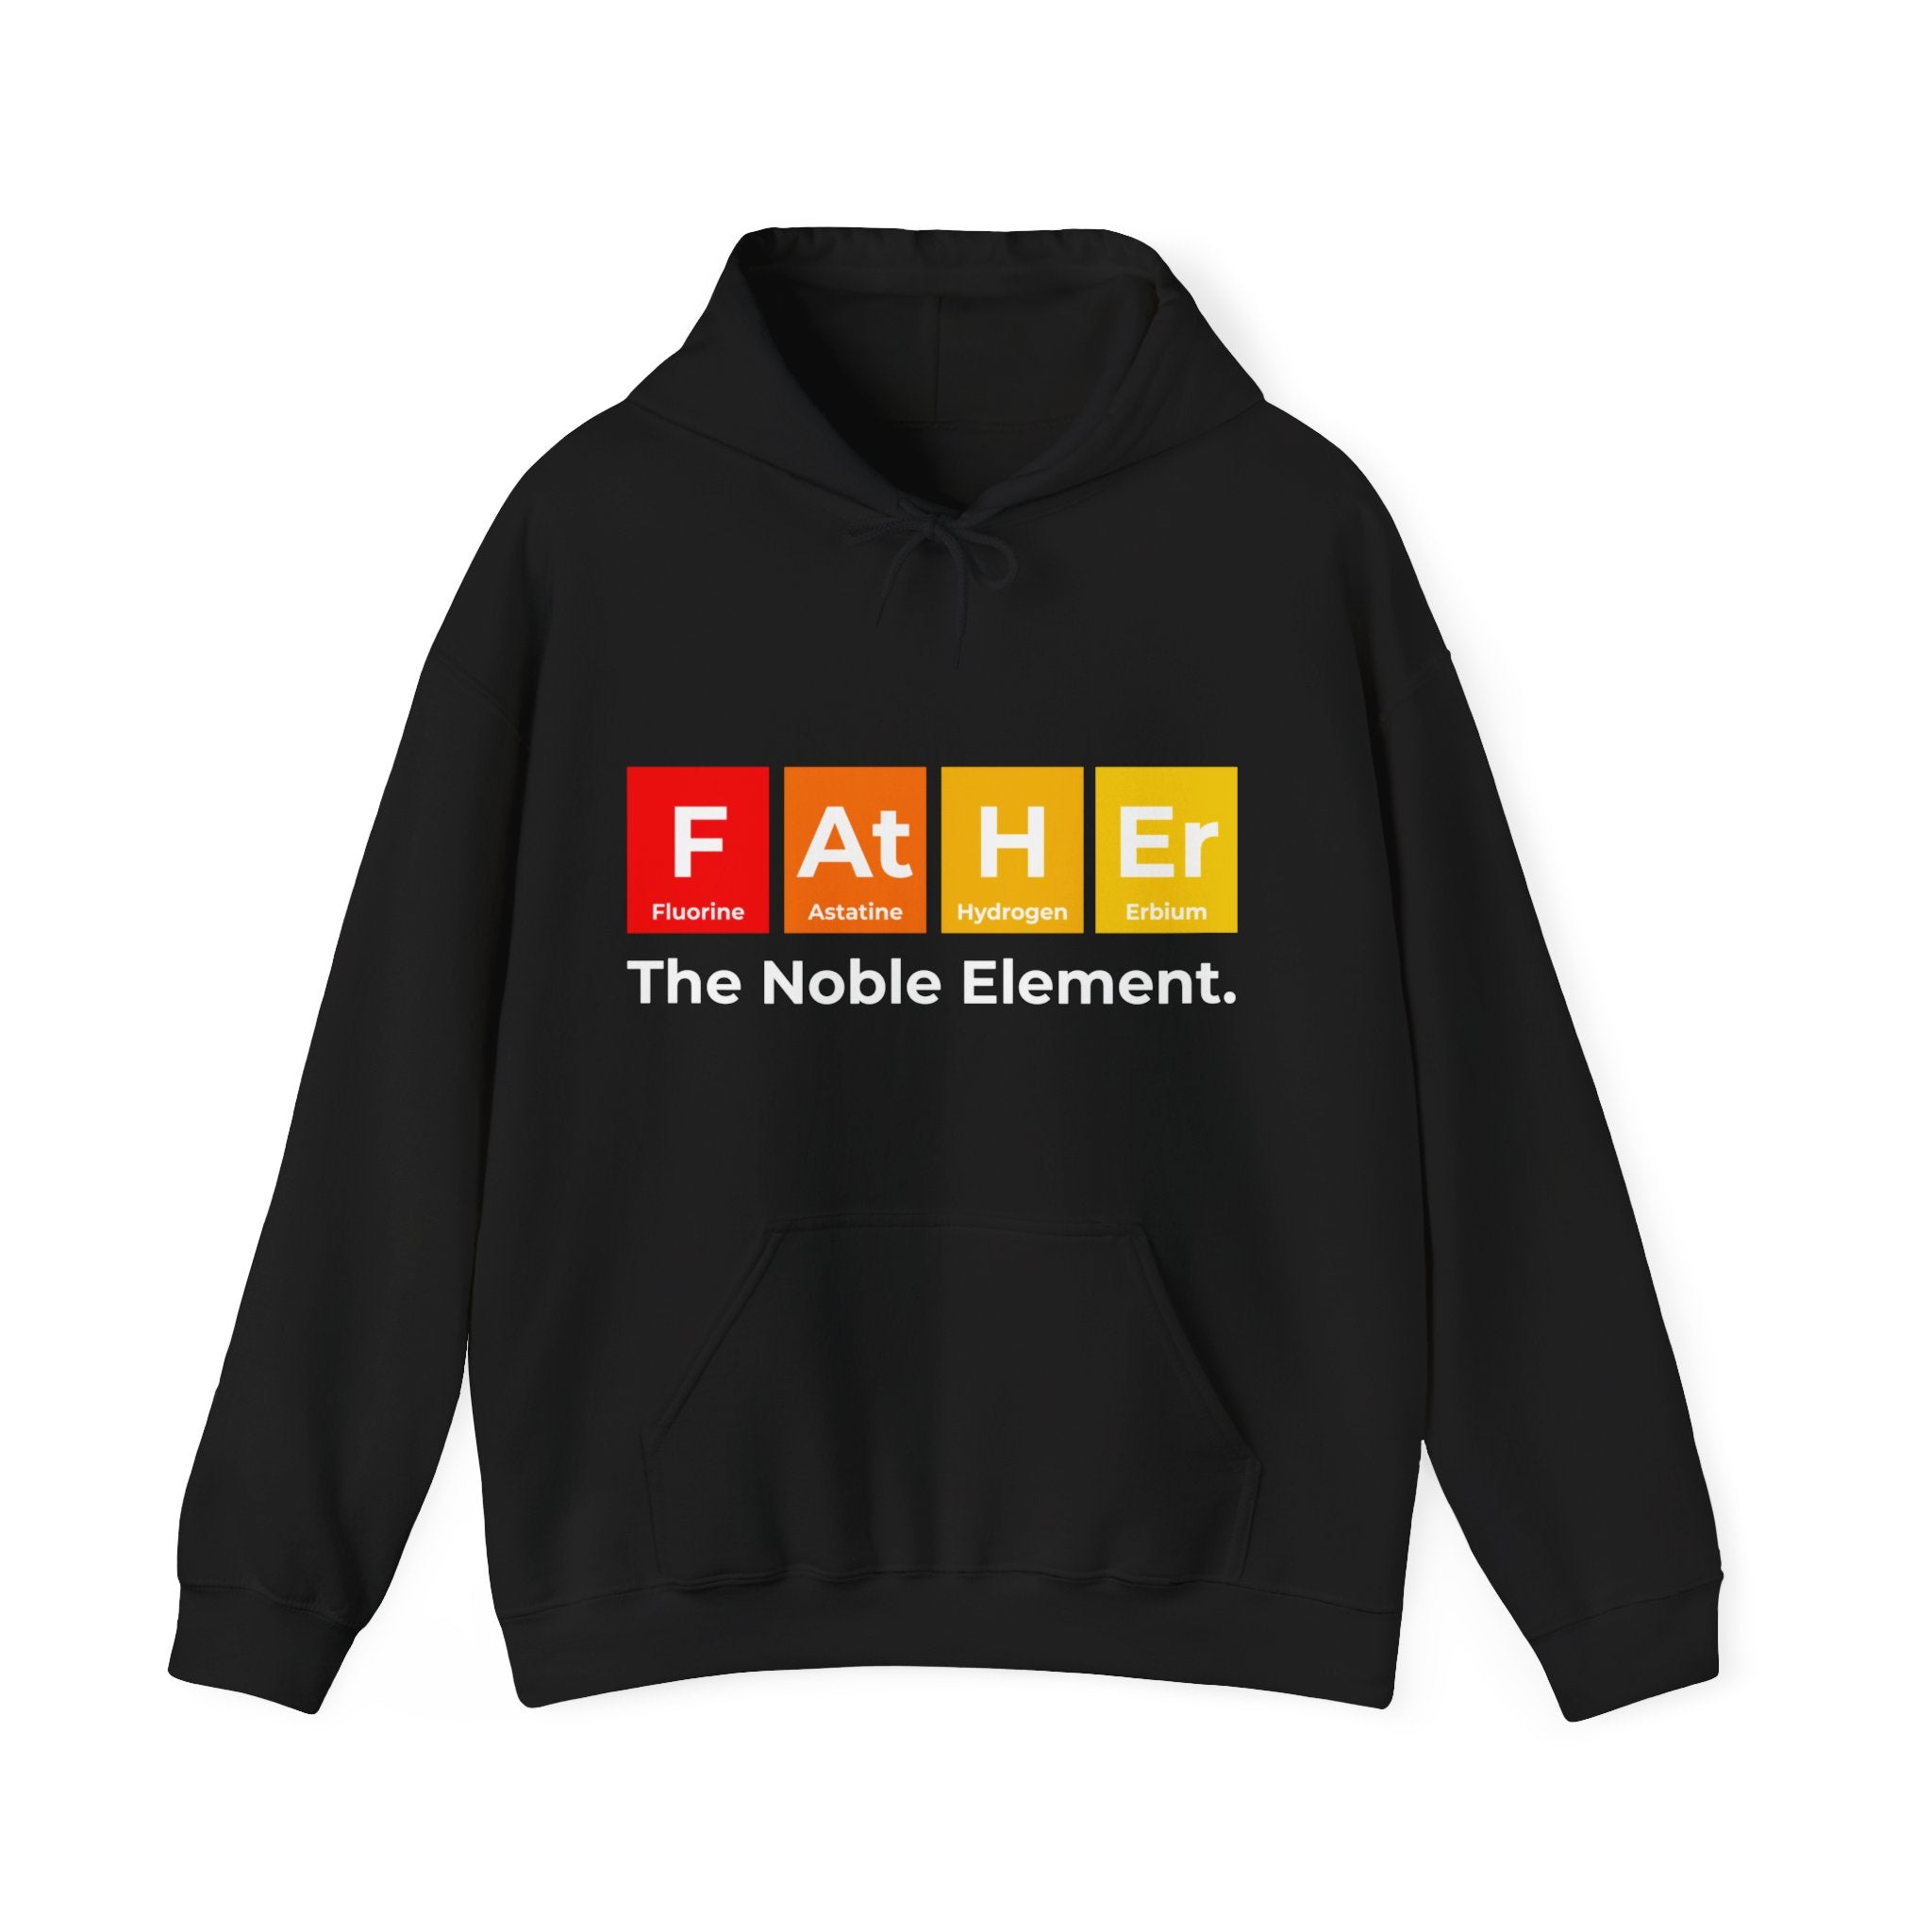 Black hooded sweatshirt with the word "Father" styled like periodic table elements: Fluorine, Astatine, Hydrogen, and Erbium. Below it reads "The Noble Element." This Father Graphic - Hooded Sweatshirt brings a touch of comfy fashion to your wardrobe.